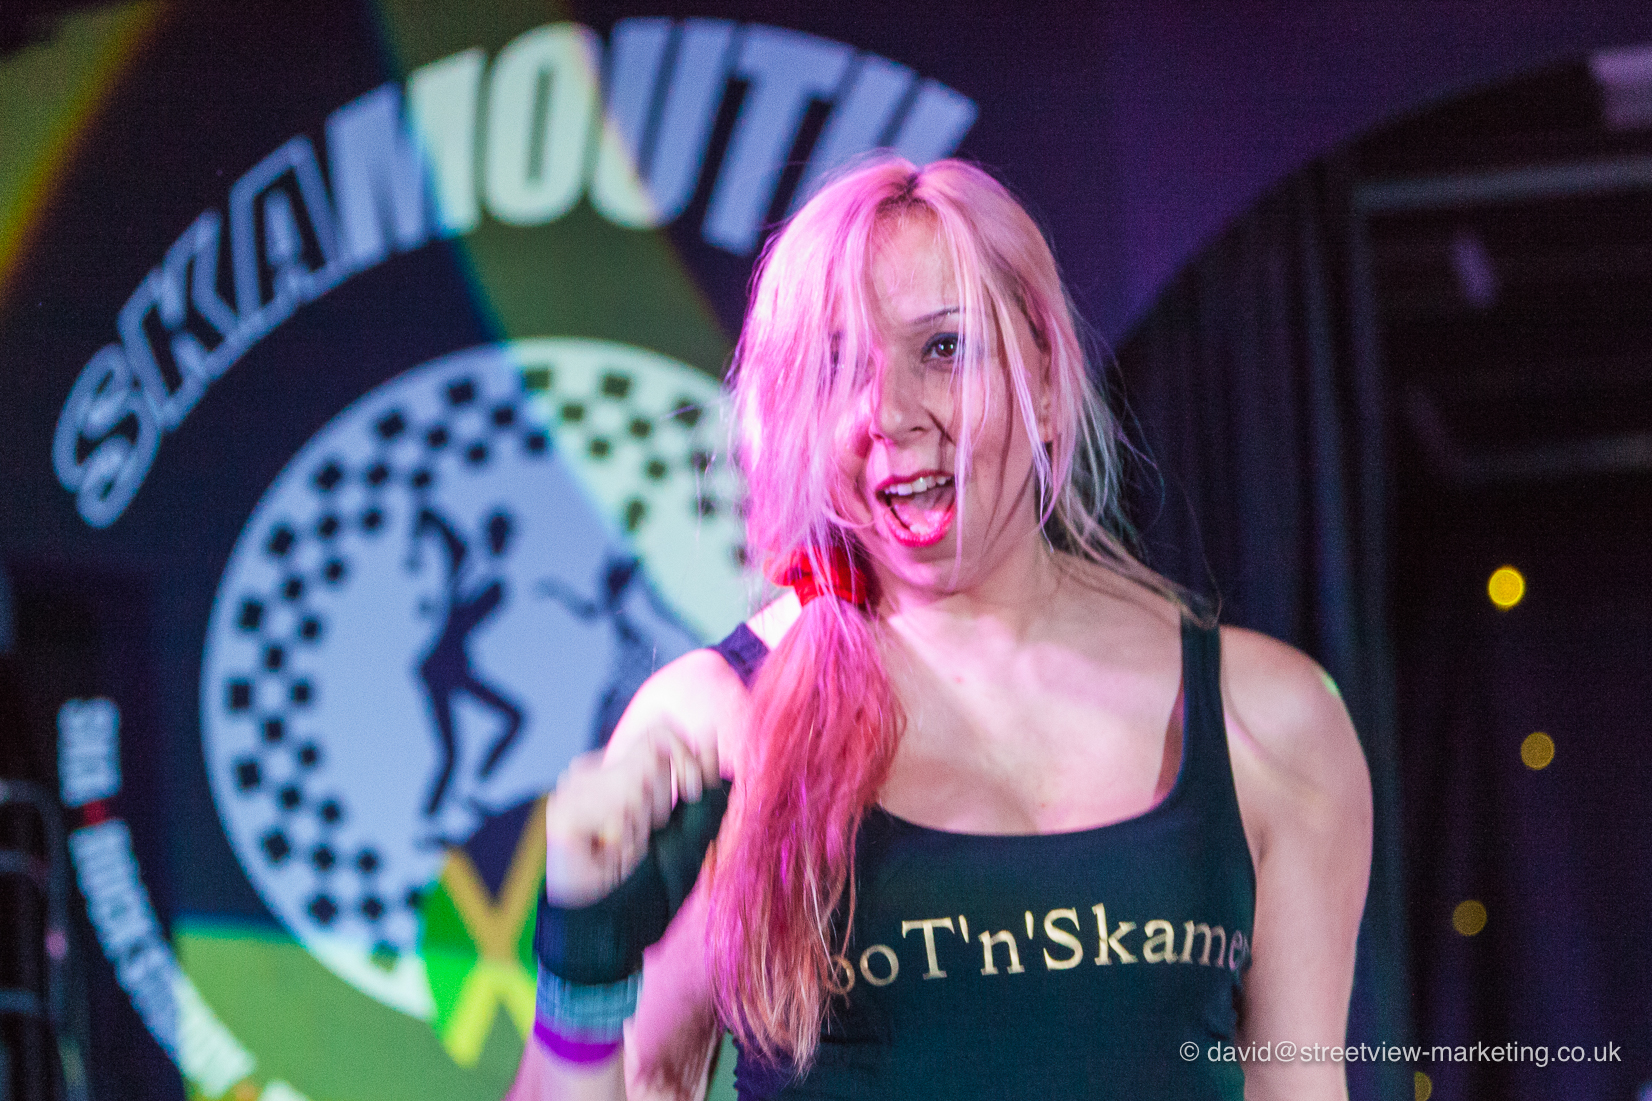 Skamouth March 2014